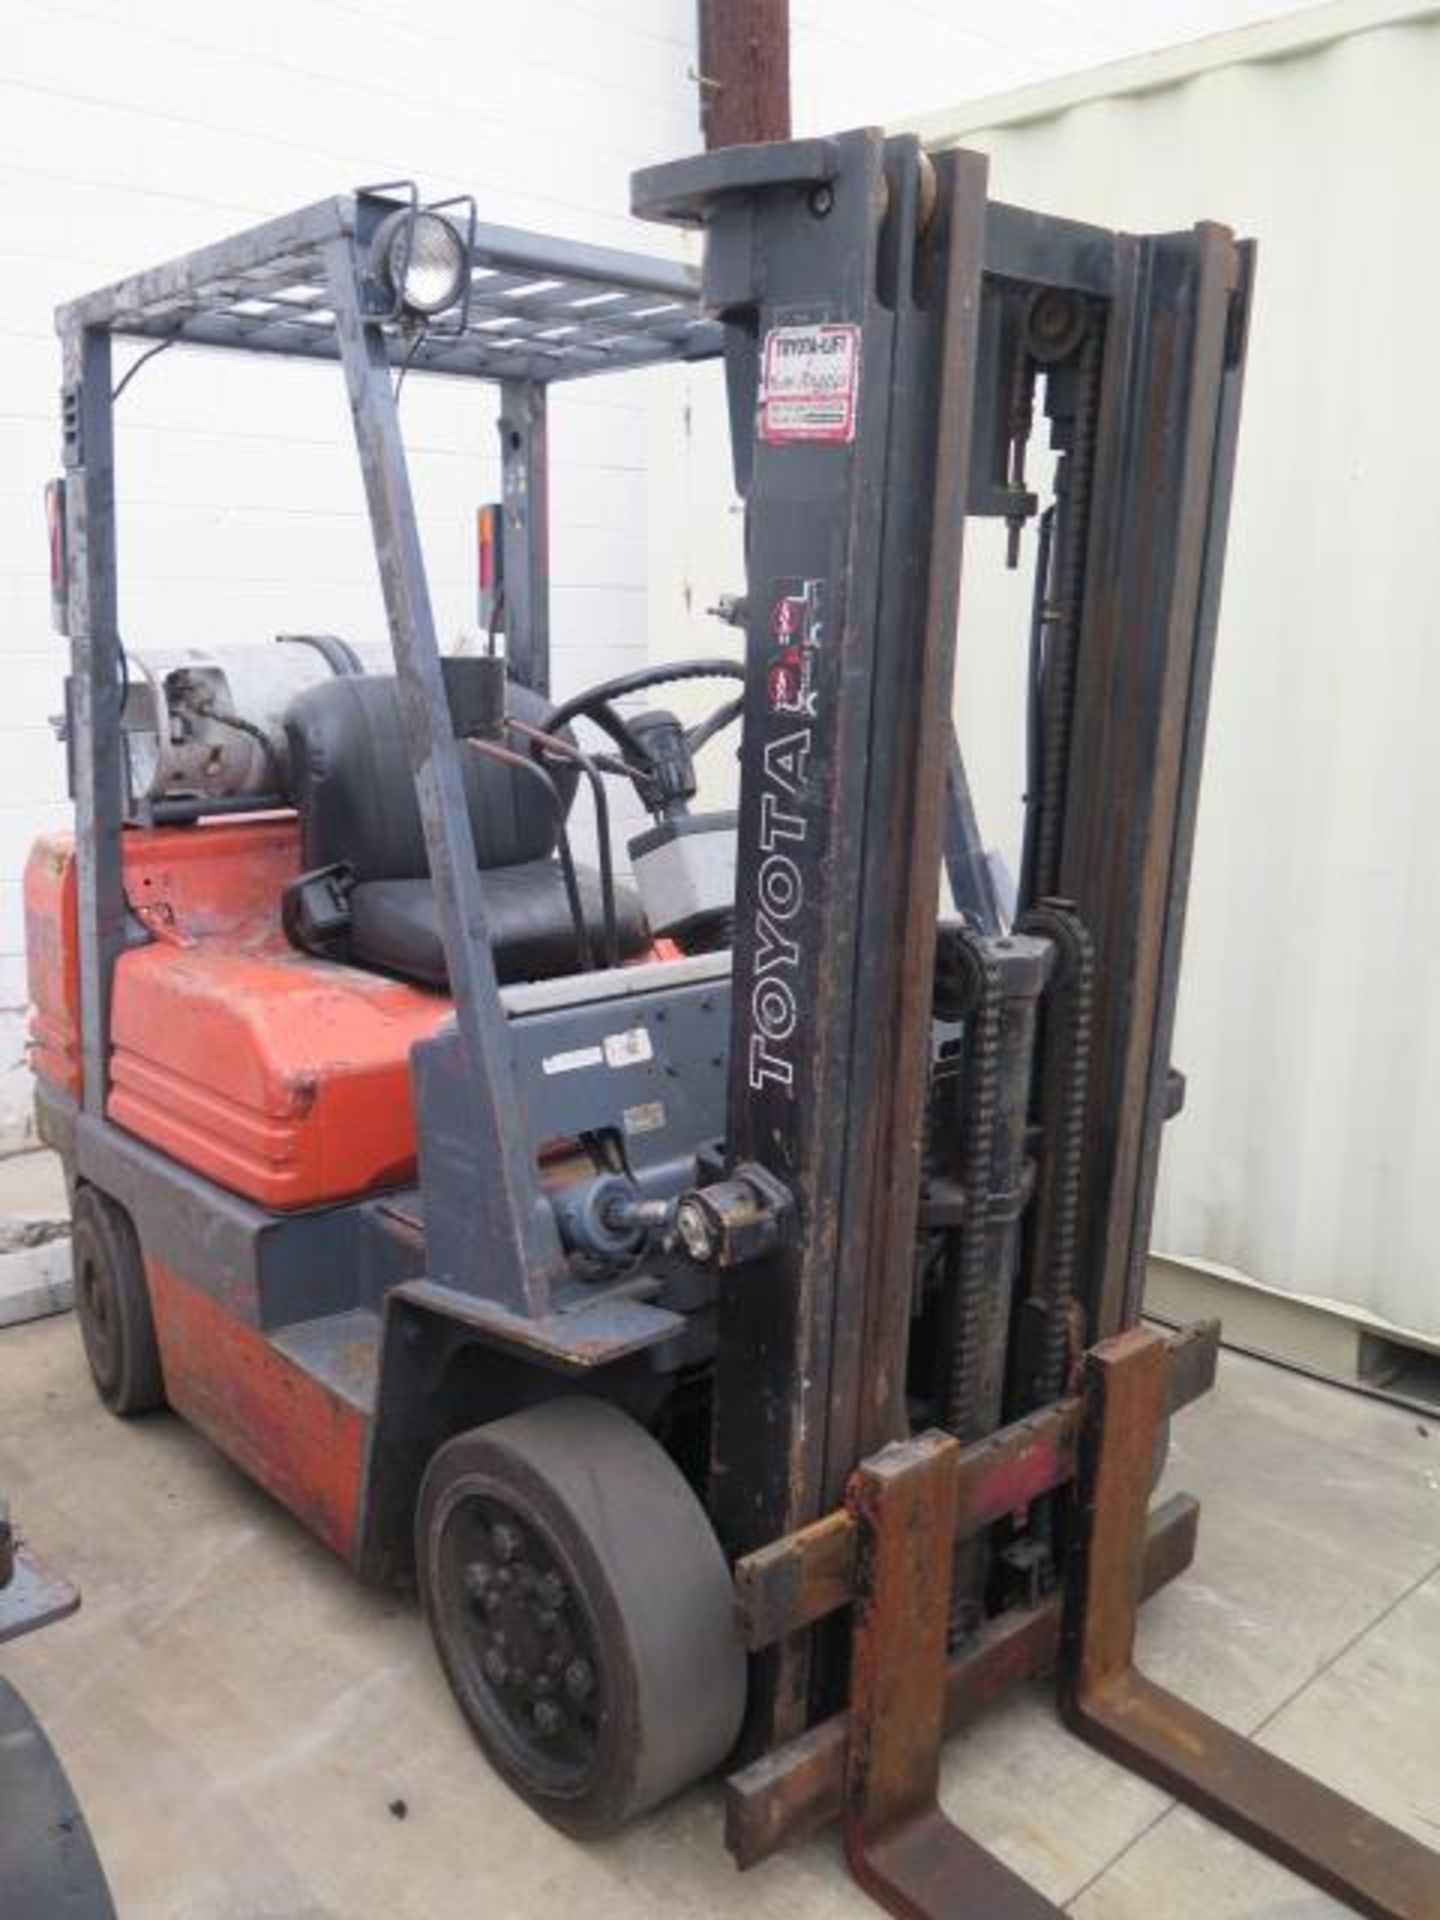 Toyota 5FGC25 5000 Lb Cap LPG Forklift s/n 5FGC25-85185 w/ 3-Stage Mast, 185" Lift Height, Cushion - Image 2 of 11